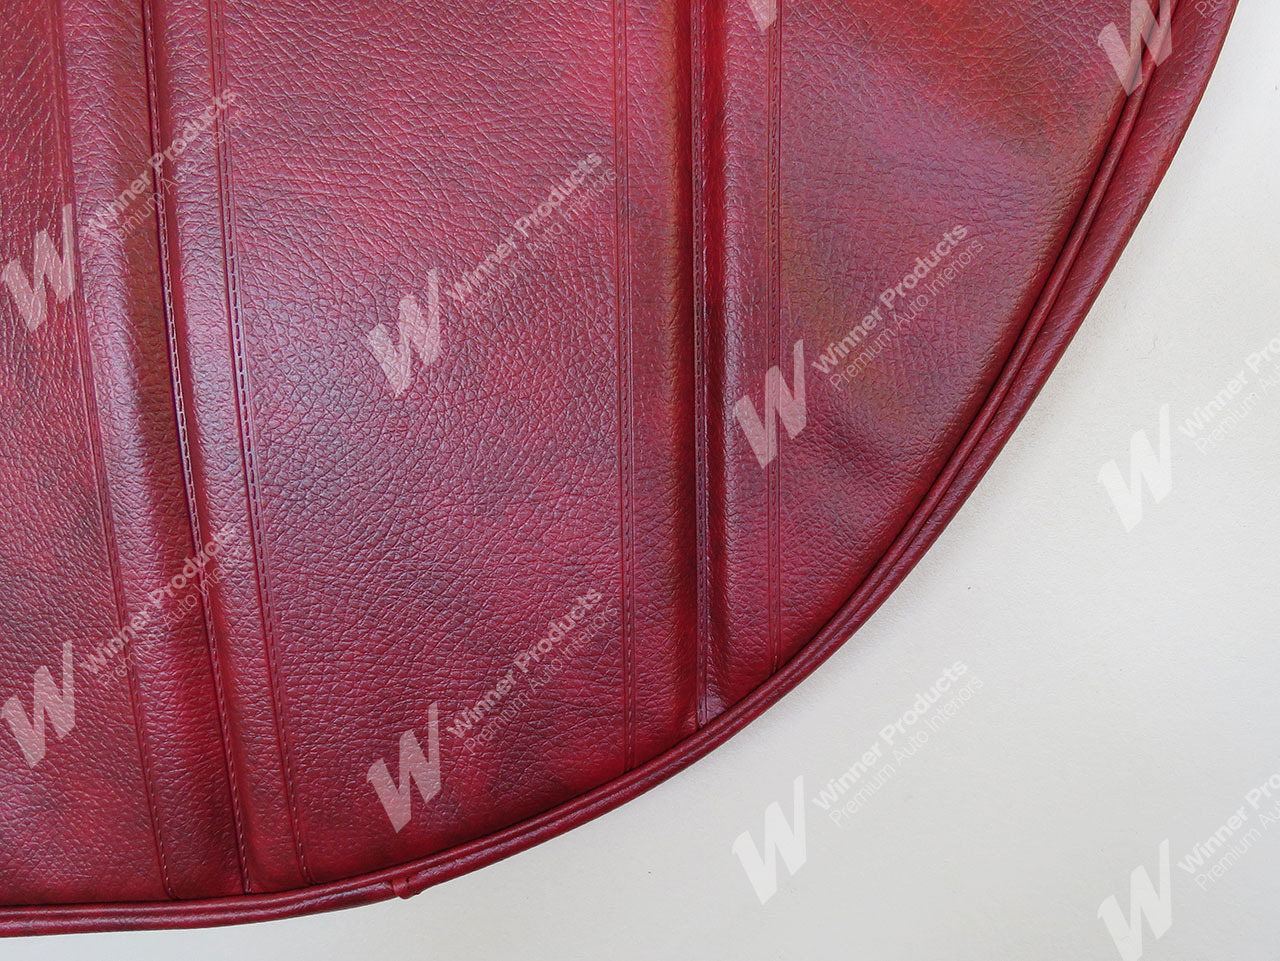 Holden Kingswood HG Kingswood Panel Van 12E Baroque Red Seat Covers (Image 4 of 4)